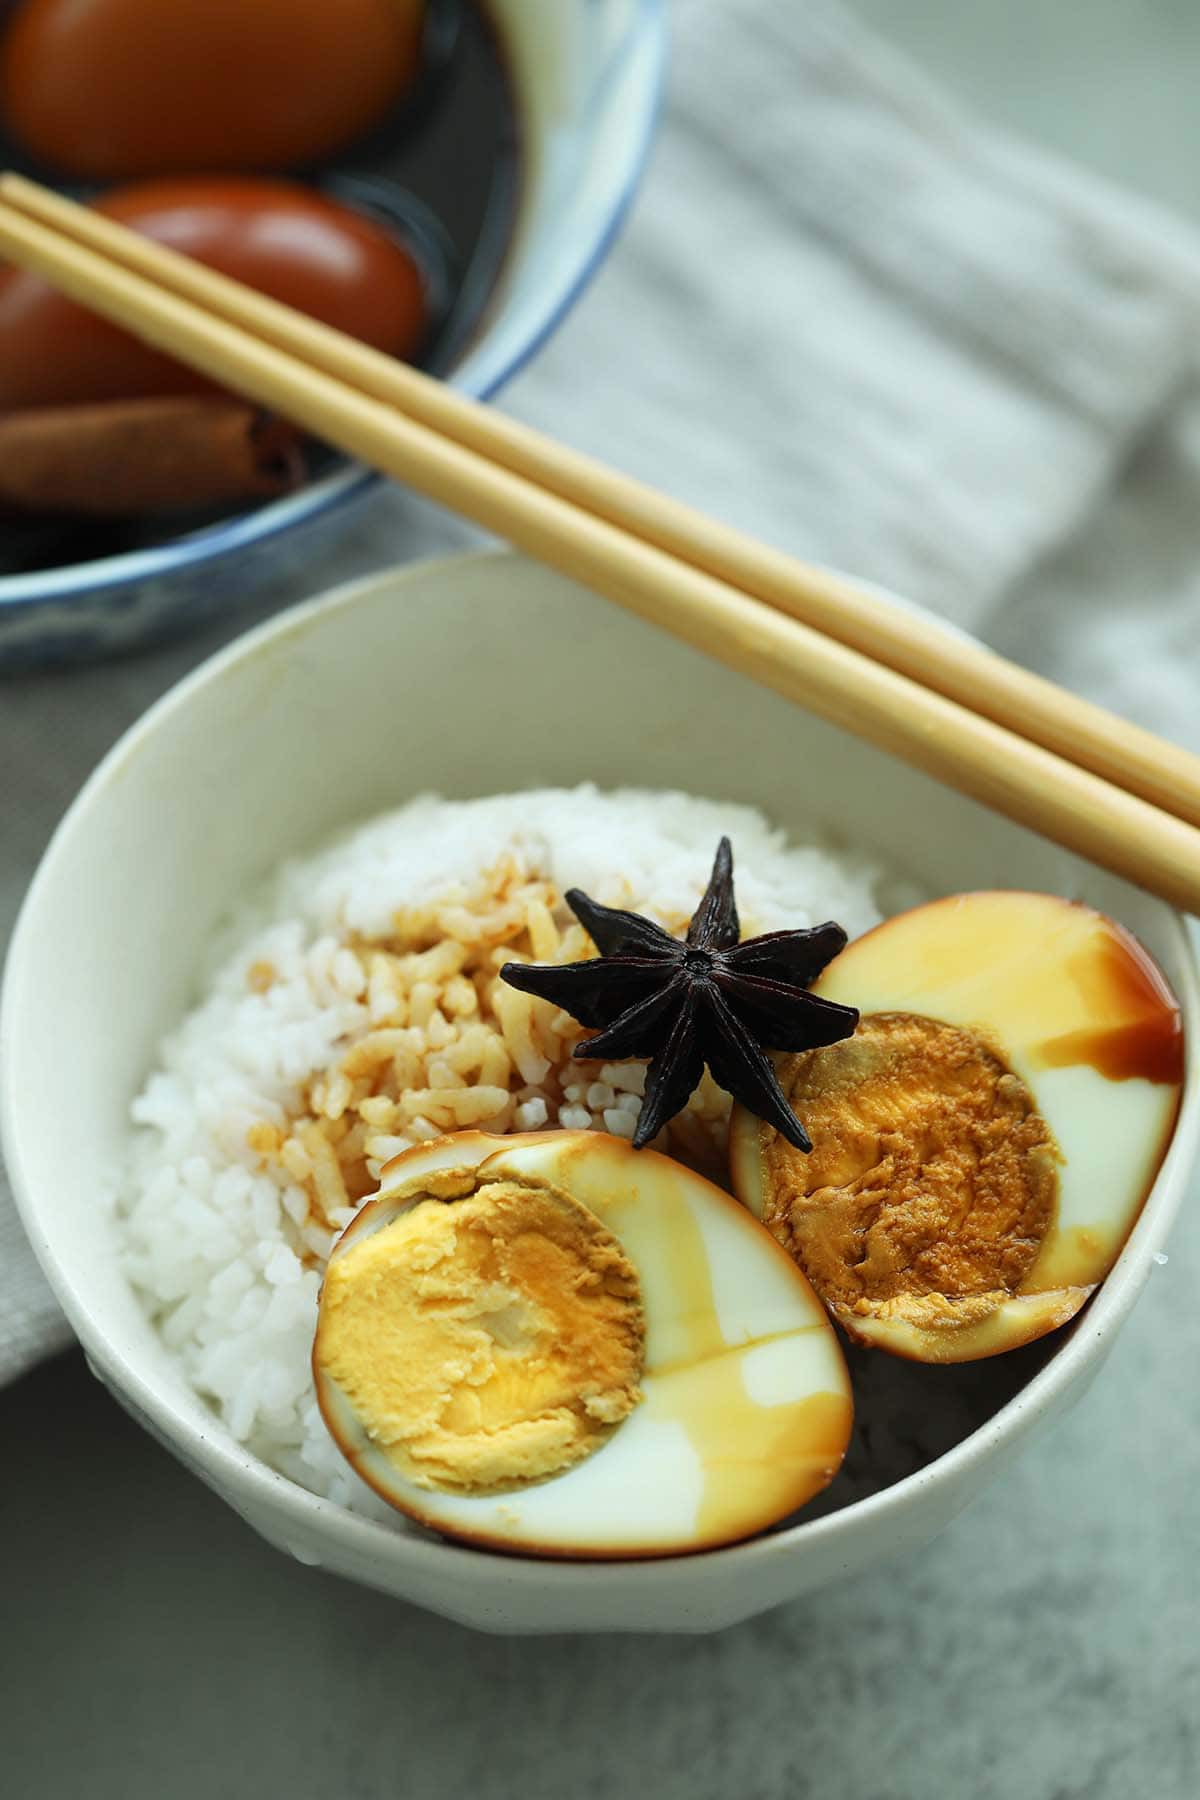 Braised hard boiled egg in soy sauce served with rice.